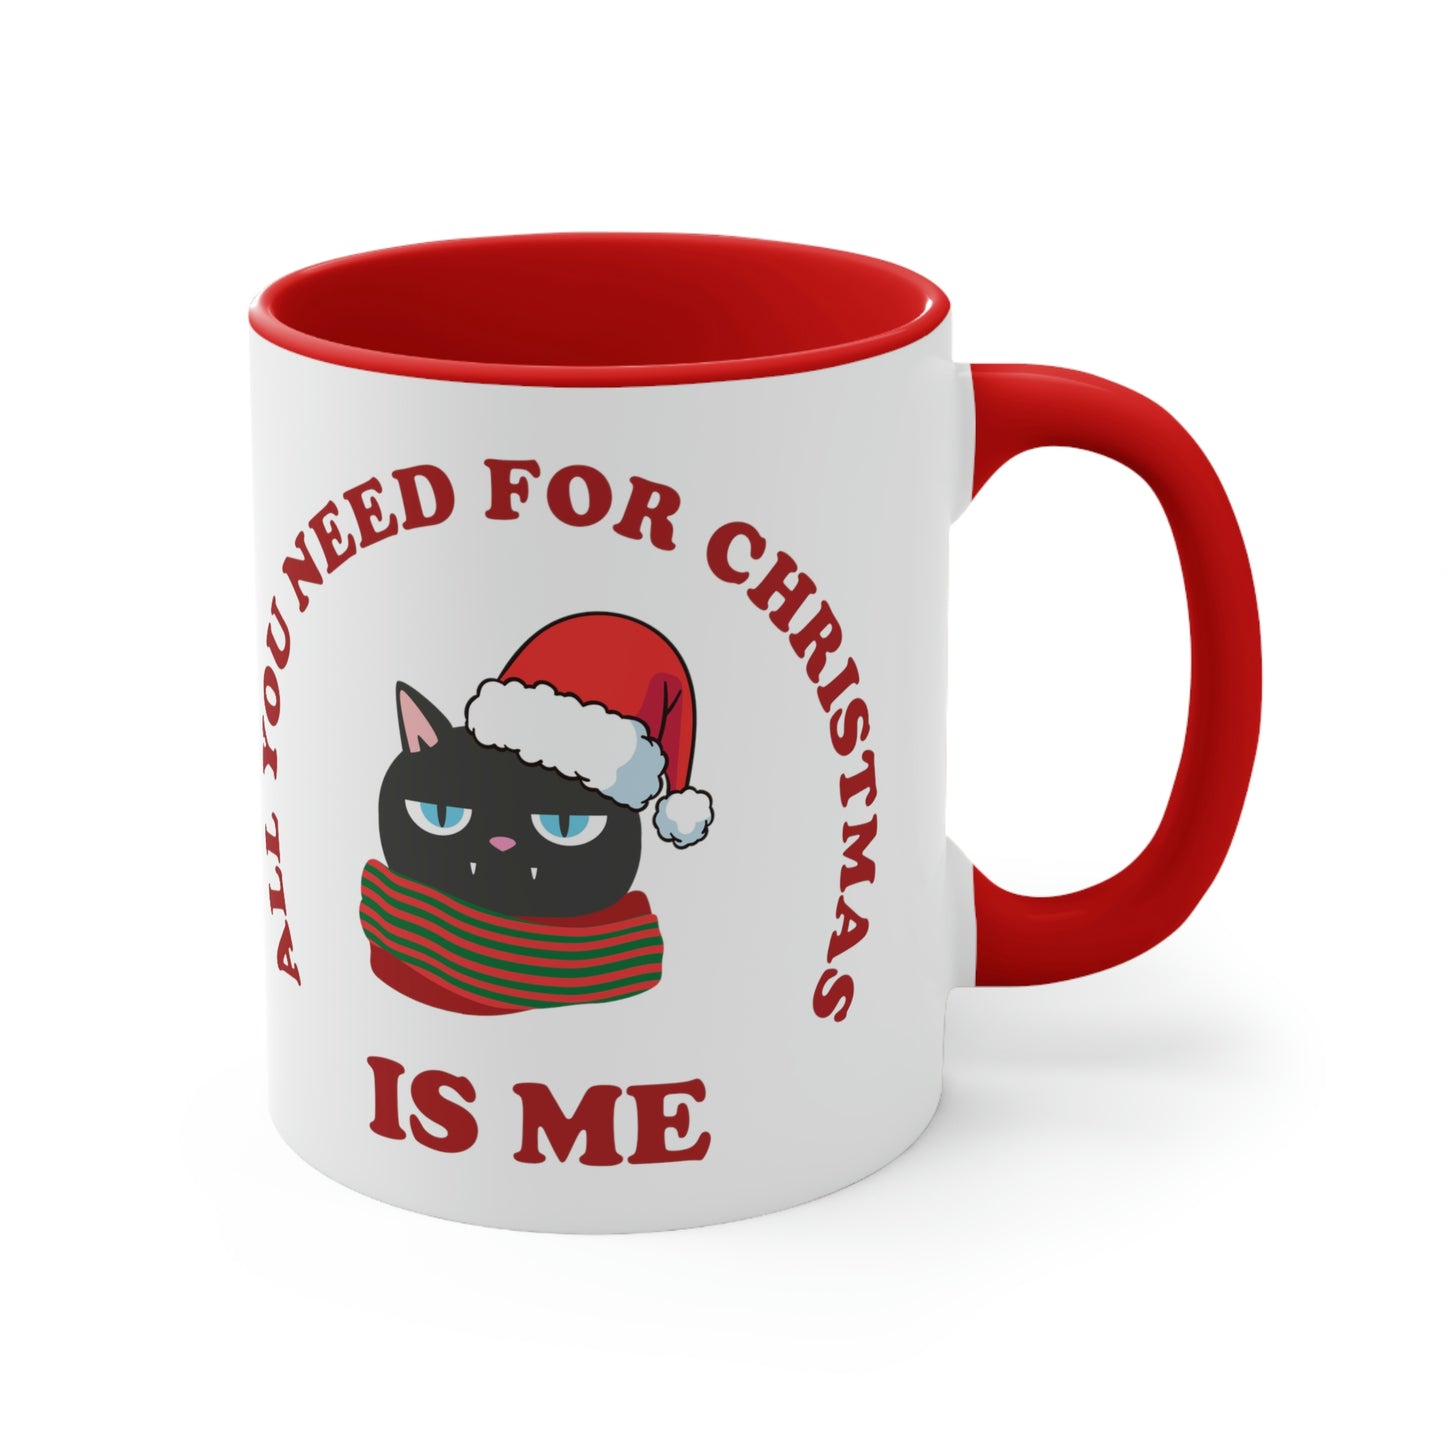 All You Need for Christmas is Me Grumpy Cat Classic Accent Coffee Mug 11oz